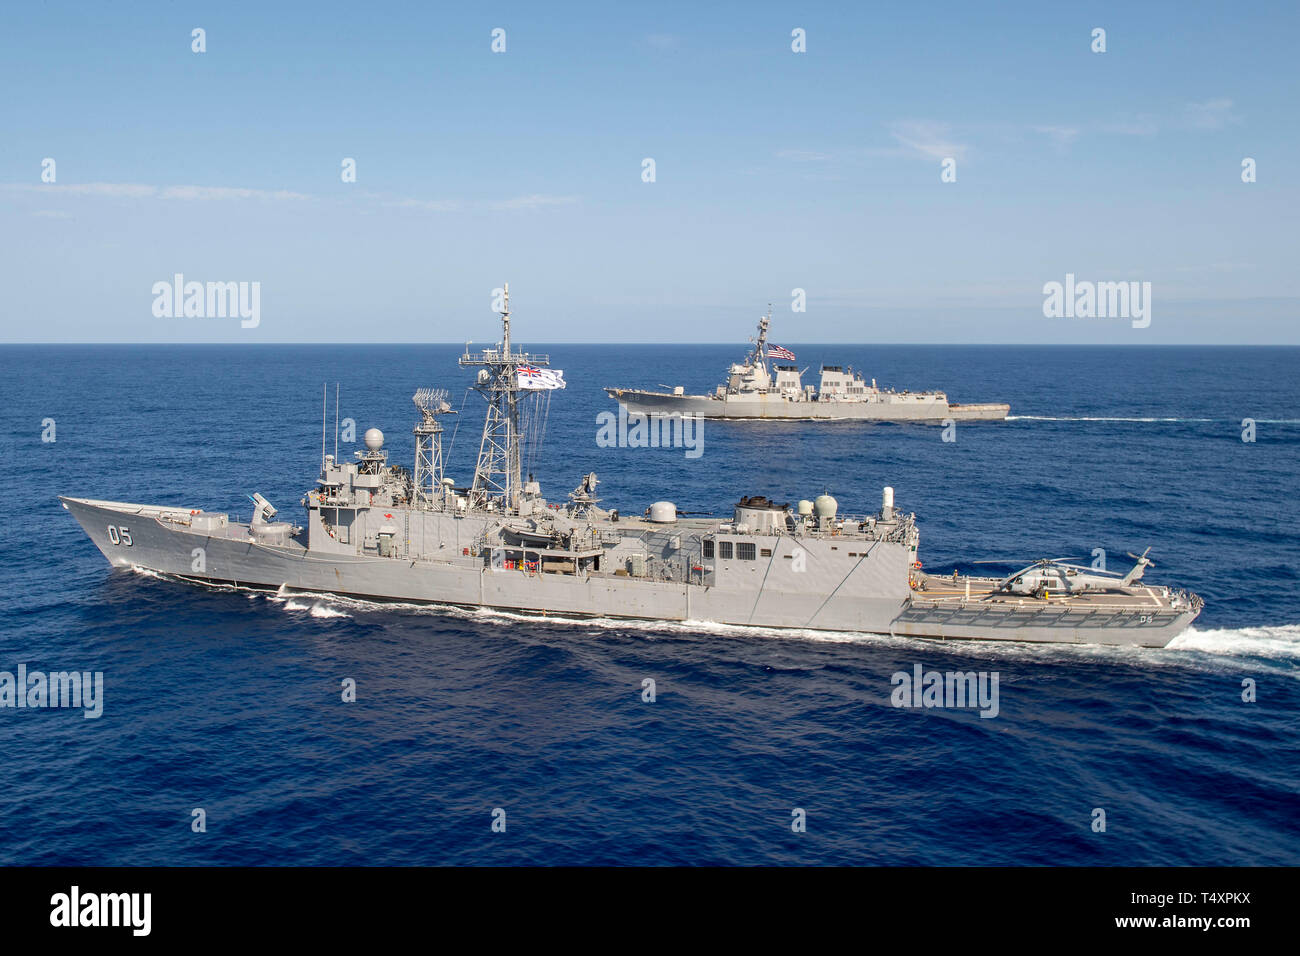 190418-N-UI104-0490     PHILIPPINE SEA (April 18, 2019) The Arleigh Burke-class guided-missile destroyer USS Preble (DDG 88) and the Royal Australian Navy Adelaide-class guided-missile frigate HMAS Melbourne (FFG 05) transit in formation during a cooperative deployment. Preble and Melbourne are participating in a cooperative deployment in order to improve on maritime capabilities between partners.  Preble is deployed to the U.S 7th Fleet area of operations in support of security and stability in the Indo-Pacific region. (U.S. Navy photo by Mass Communication Specialist 1st Class Bryan Niegel/R Stock Photo